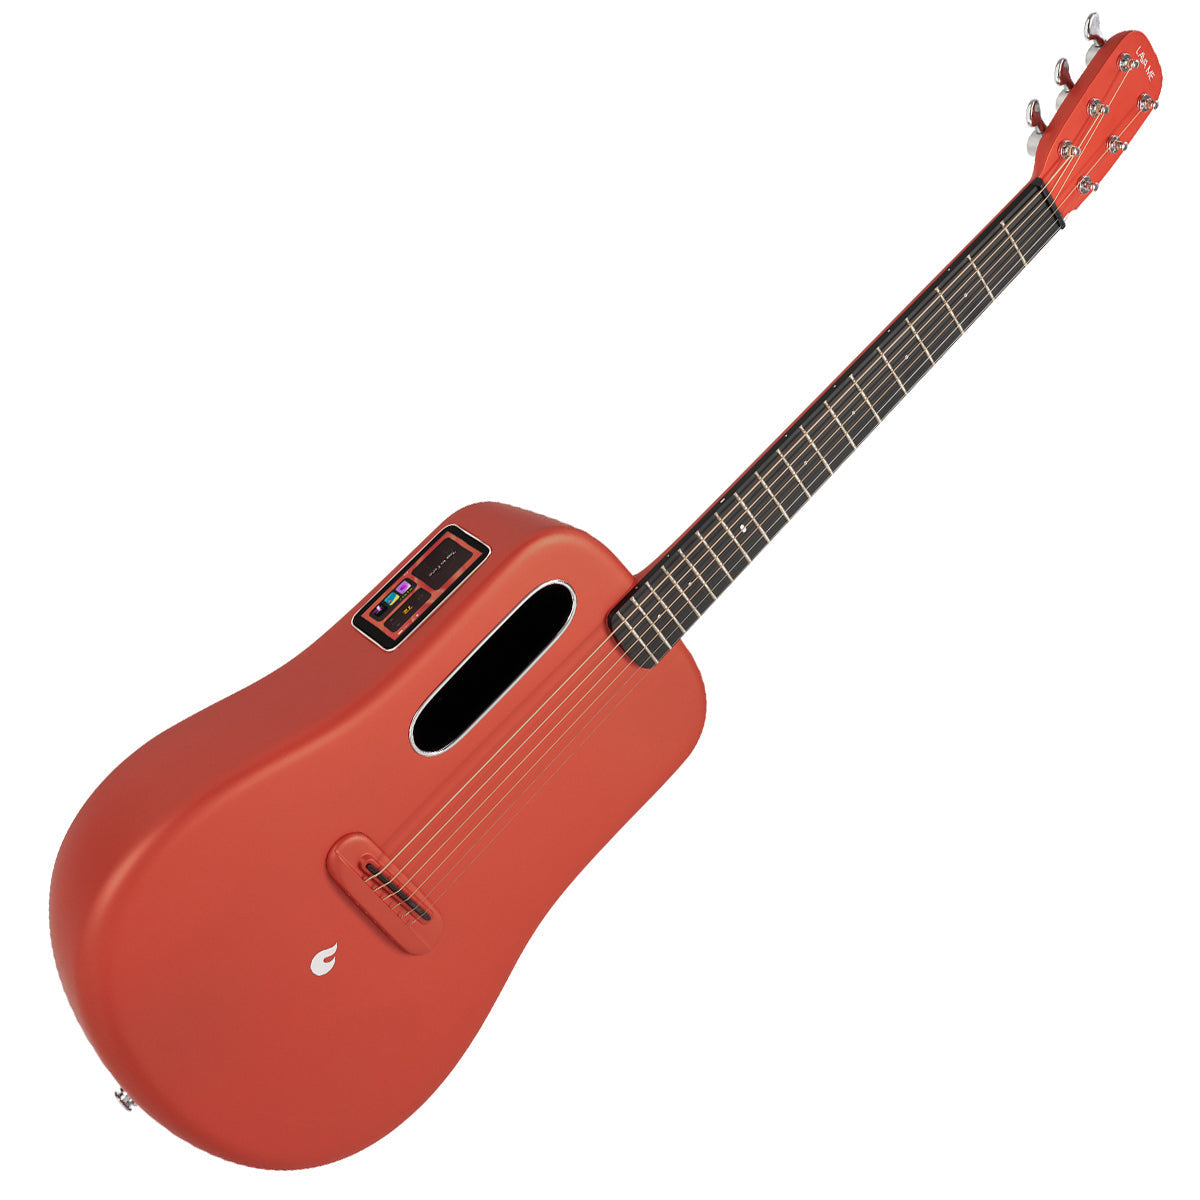 LAVA ME 3 36" with Space Bag ~ Red, Acoustic Guitar for sale at Richards Guitars.